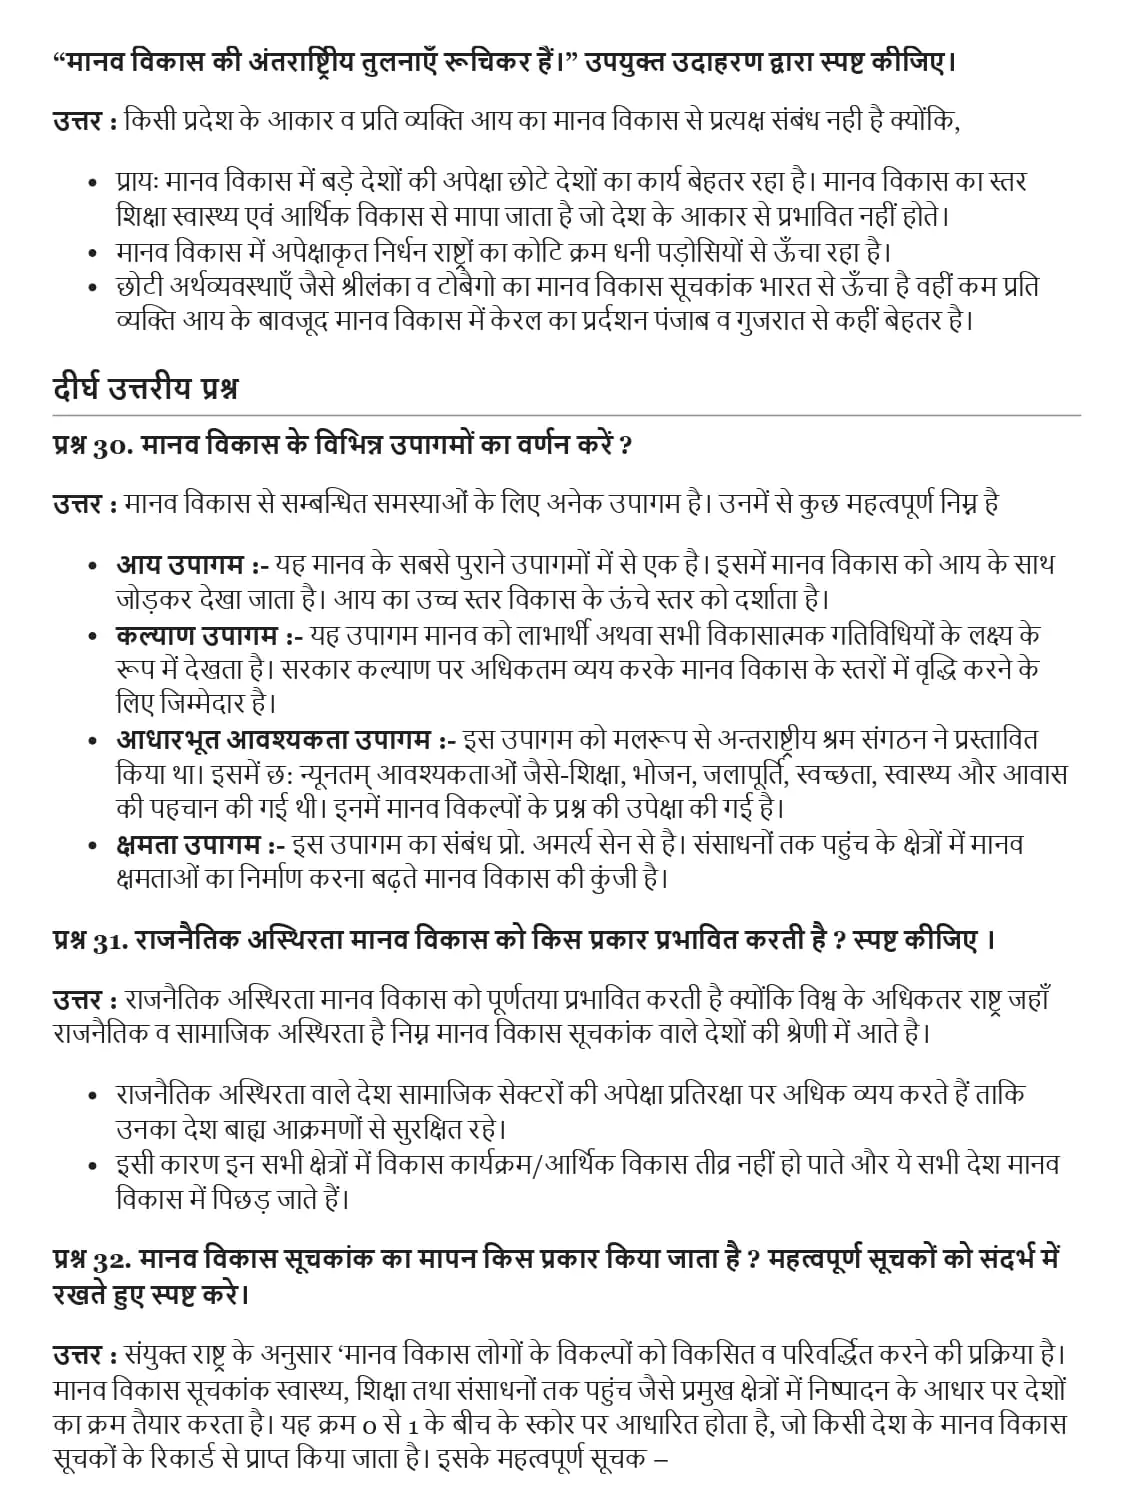 UP Board Important Questions Class 12 Chapter 4 007